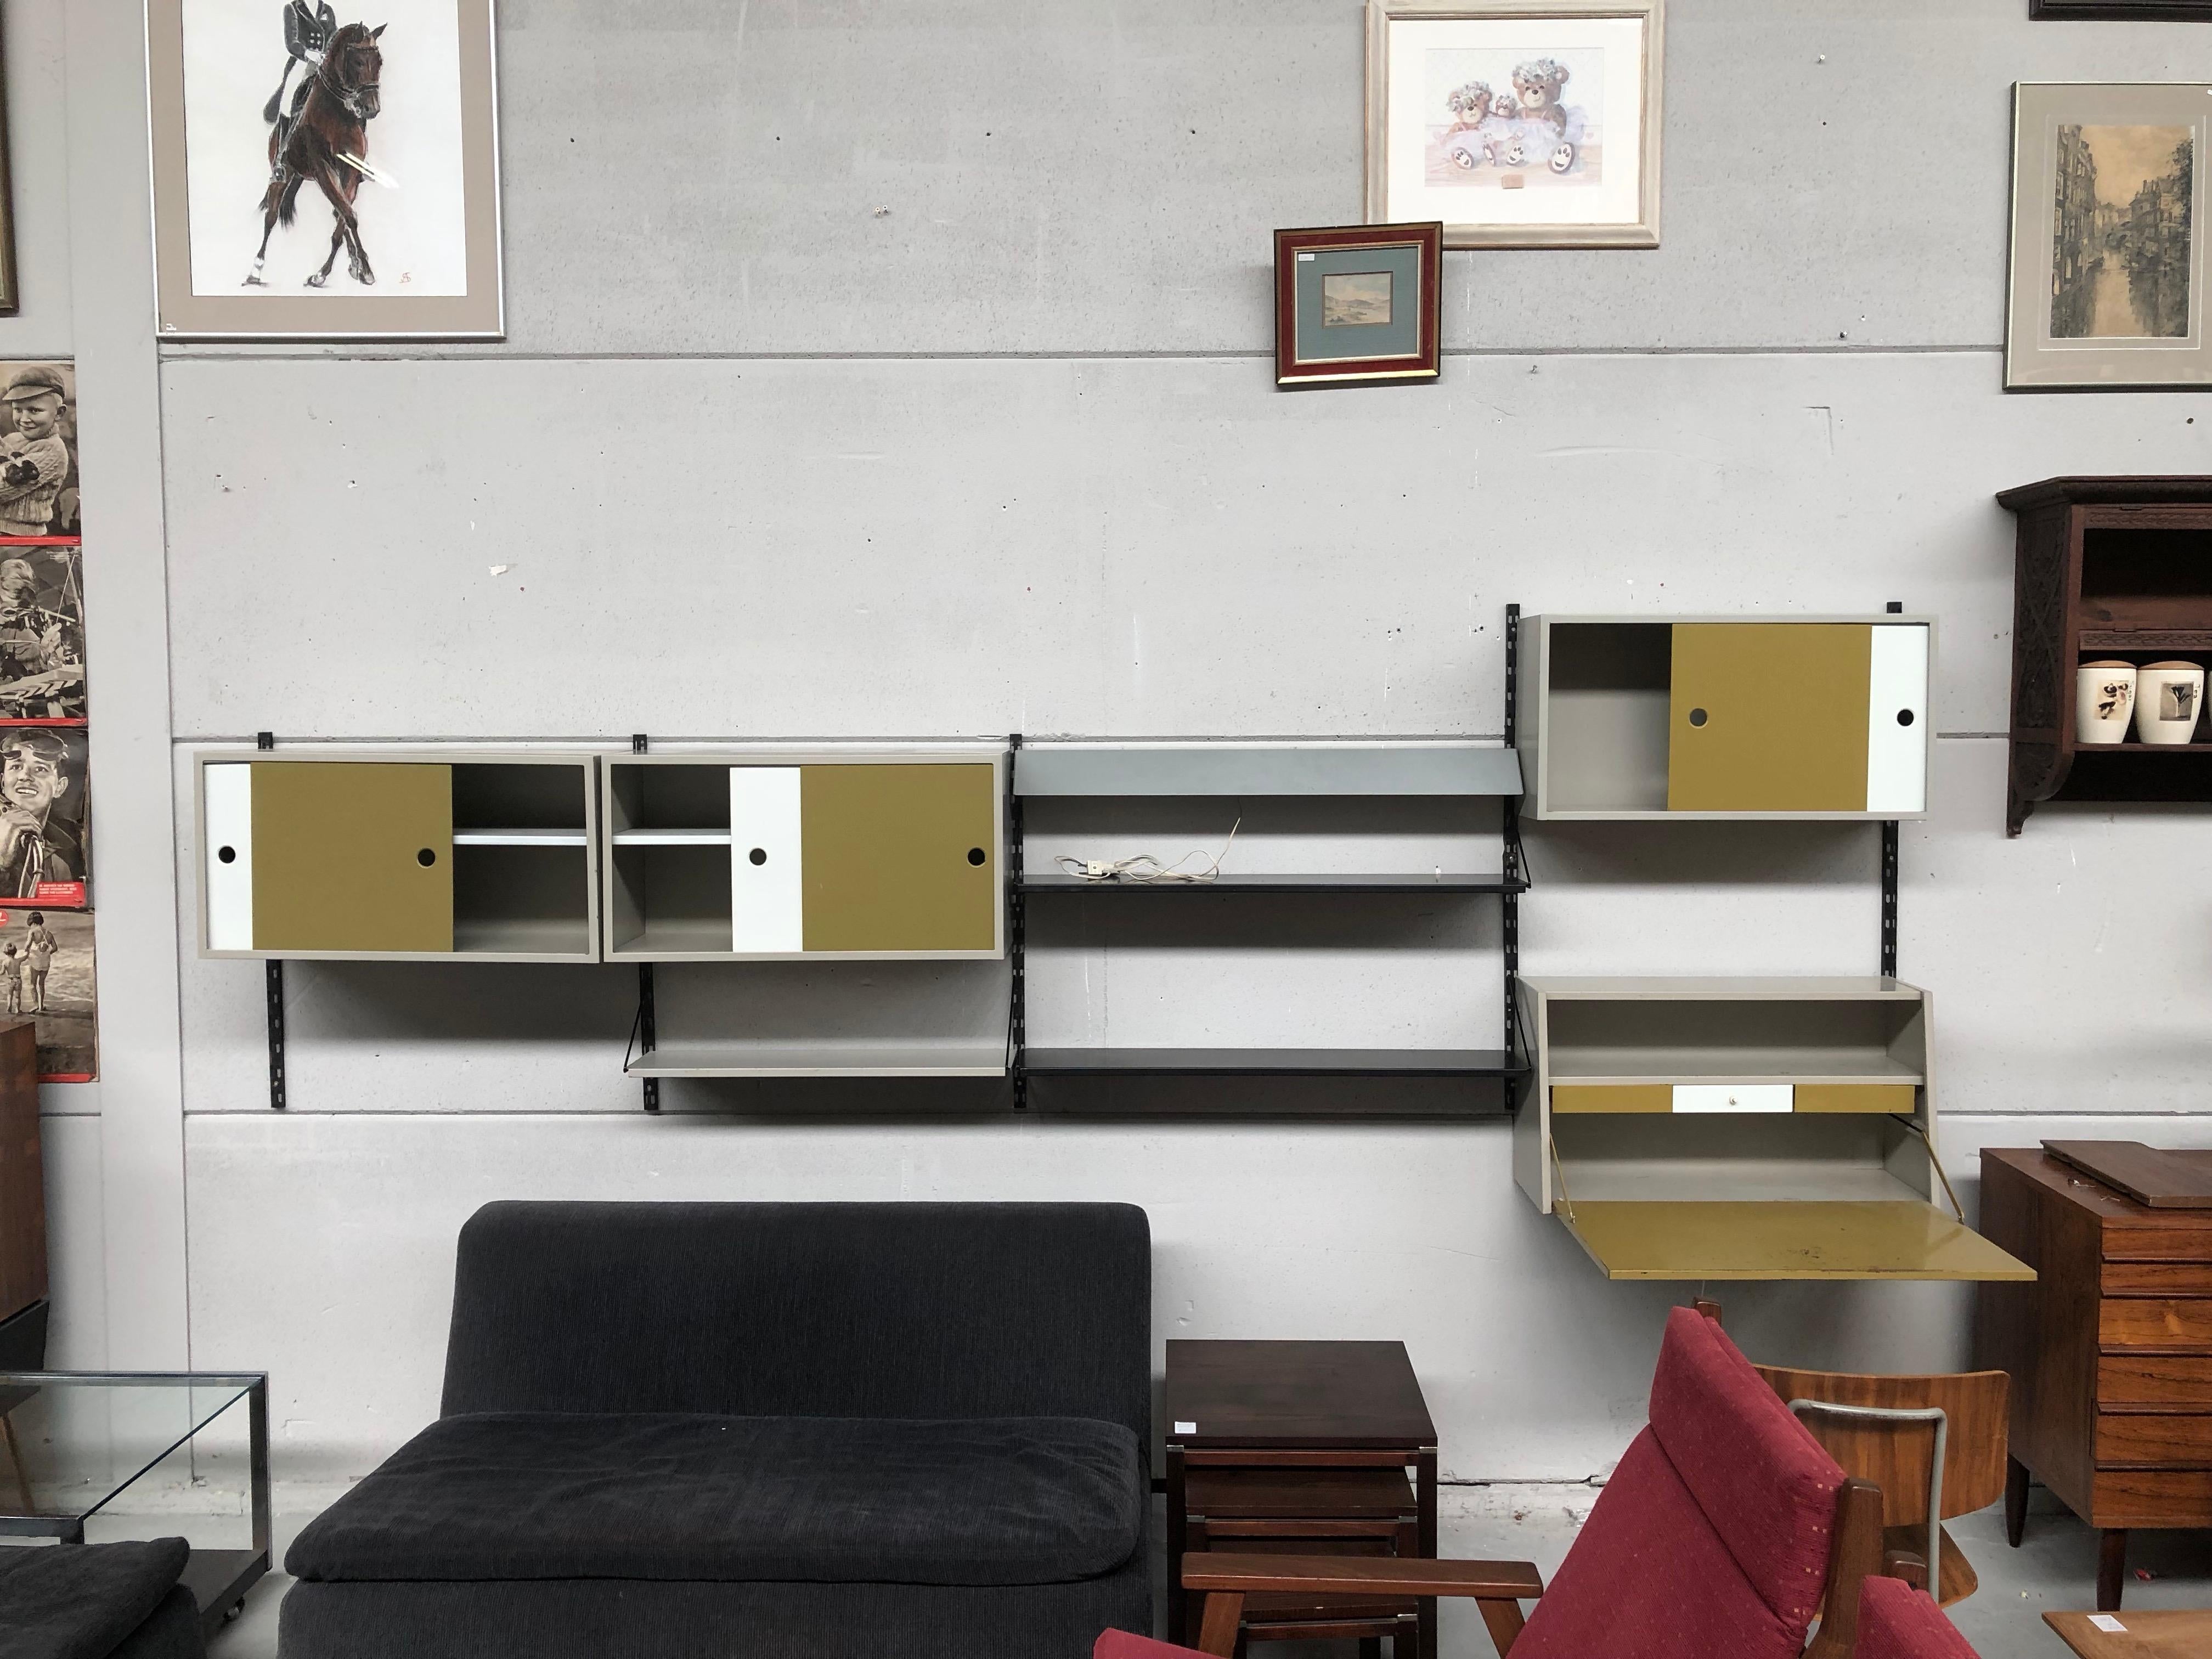 Mid-20th Century Wall System by Tjerk Reijenga for Pilastro, Netherlands -circa 1960